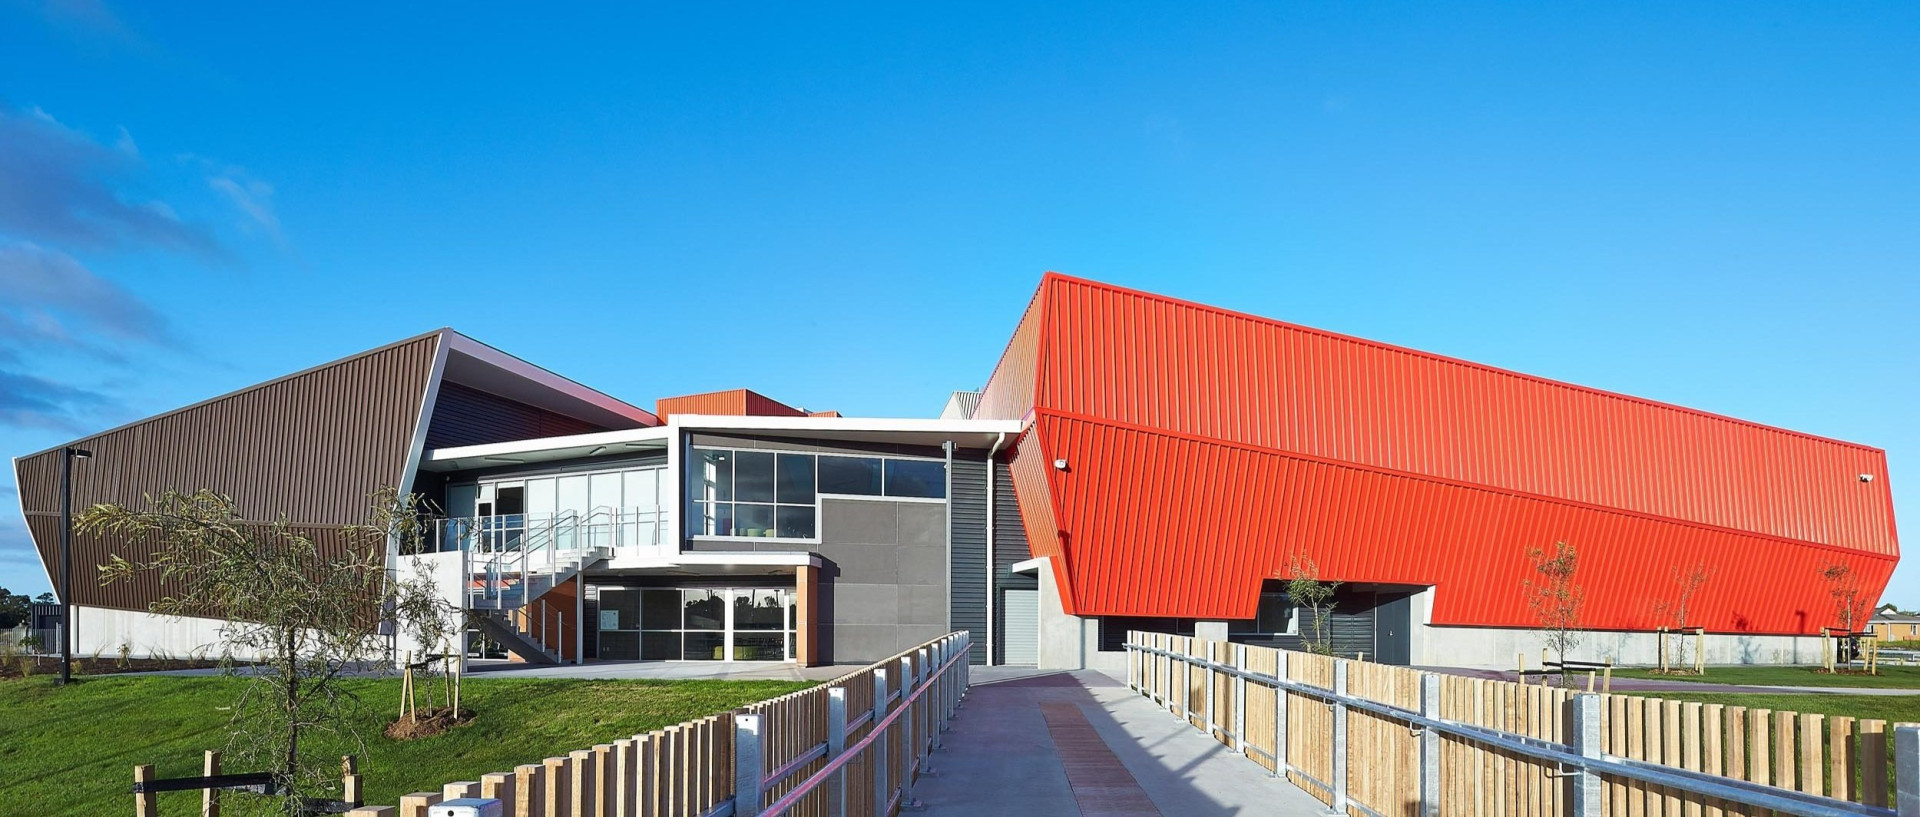 hobsonville point secondary 2014 asc architects+7